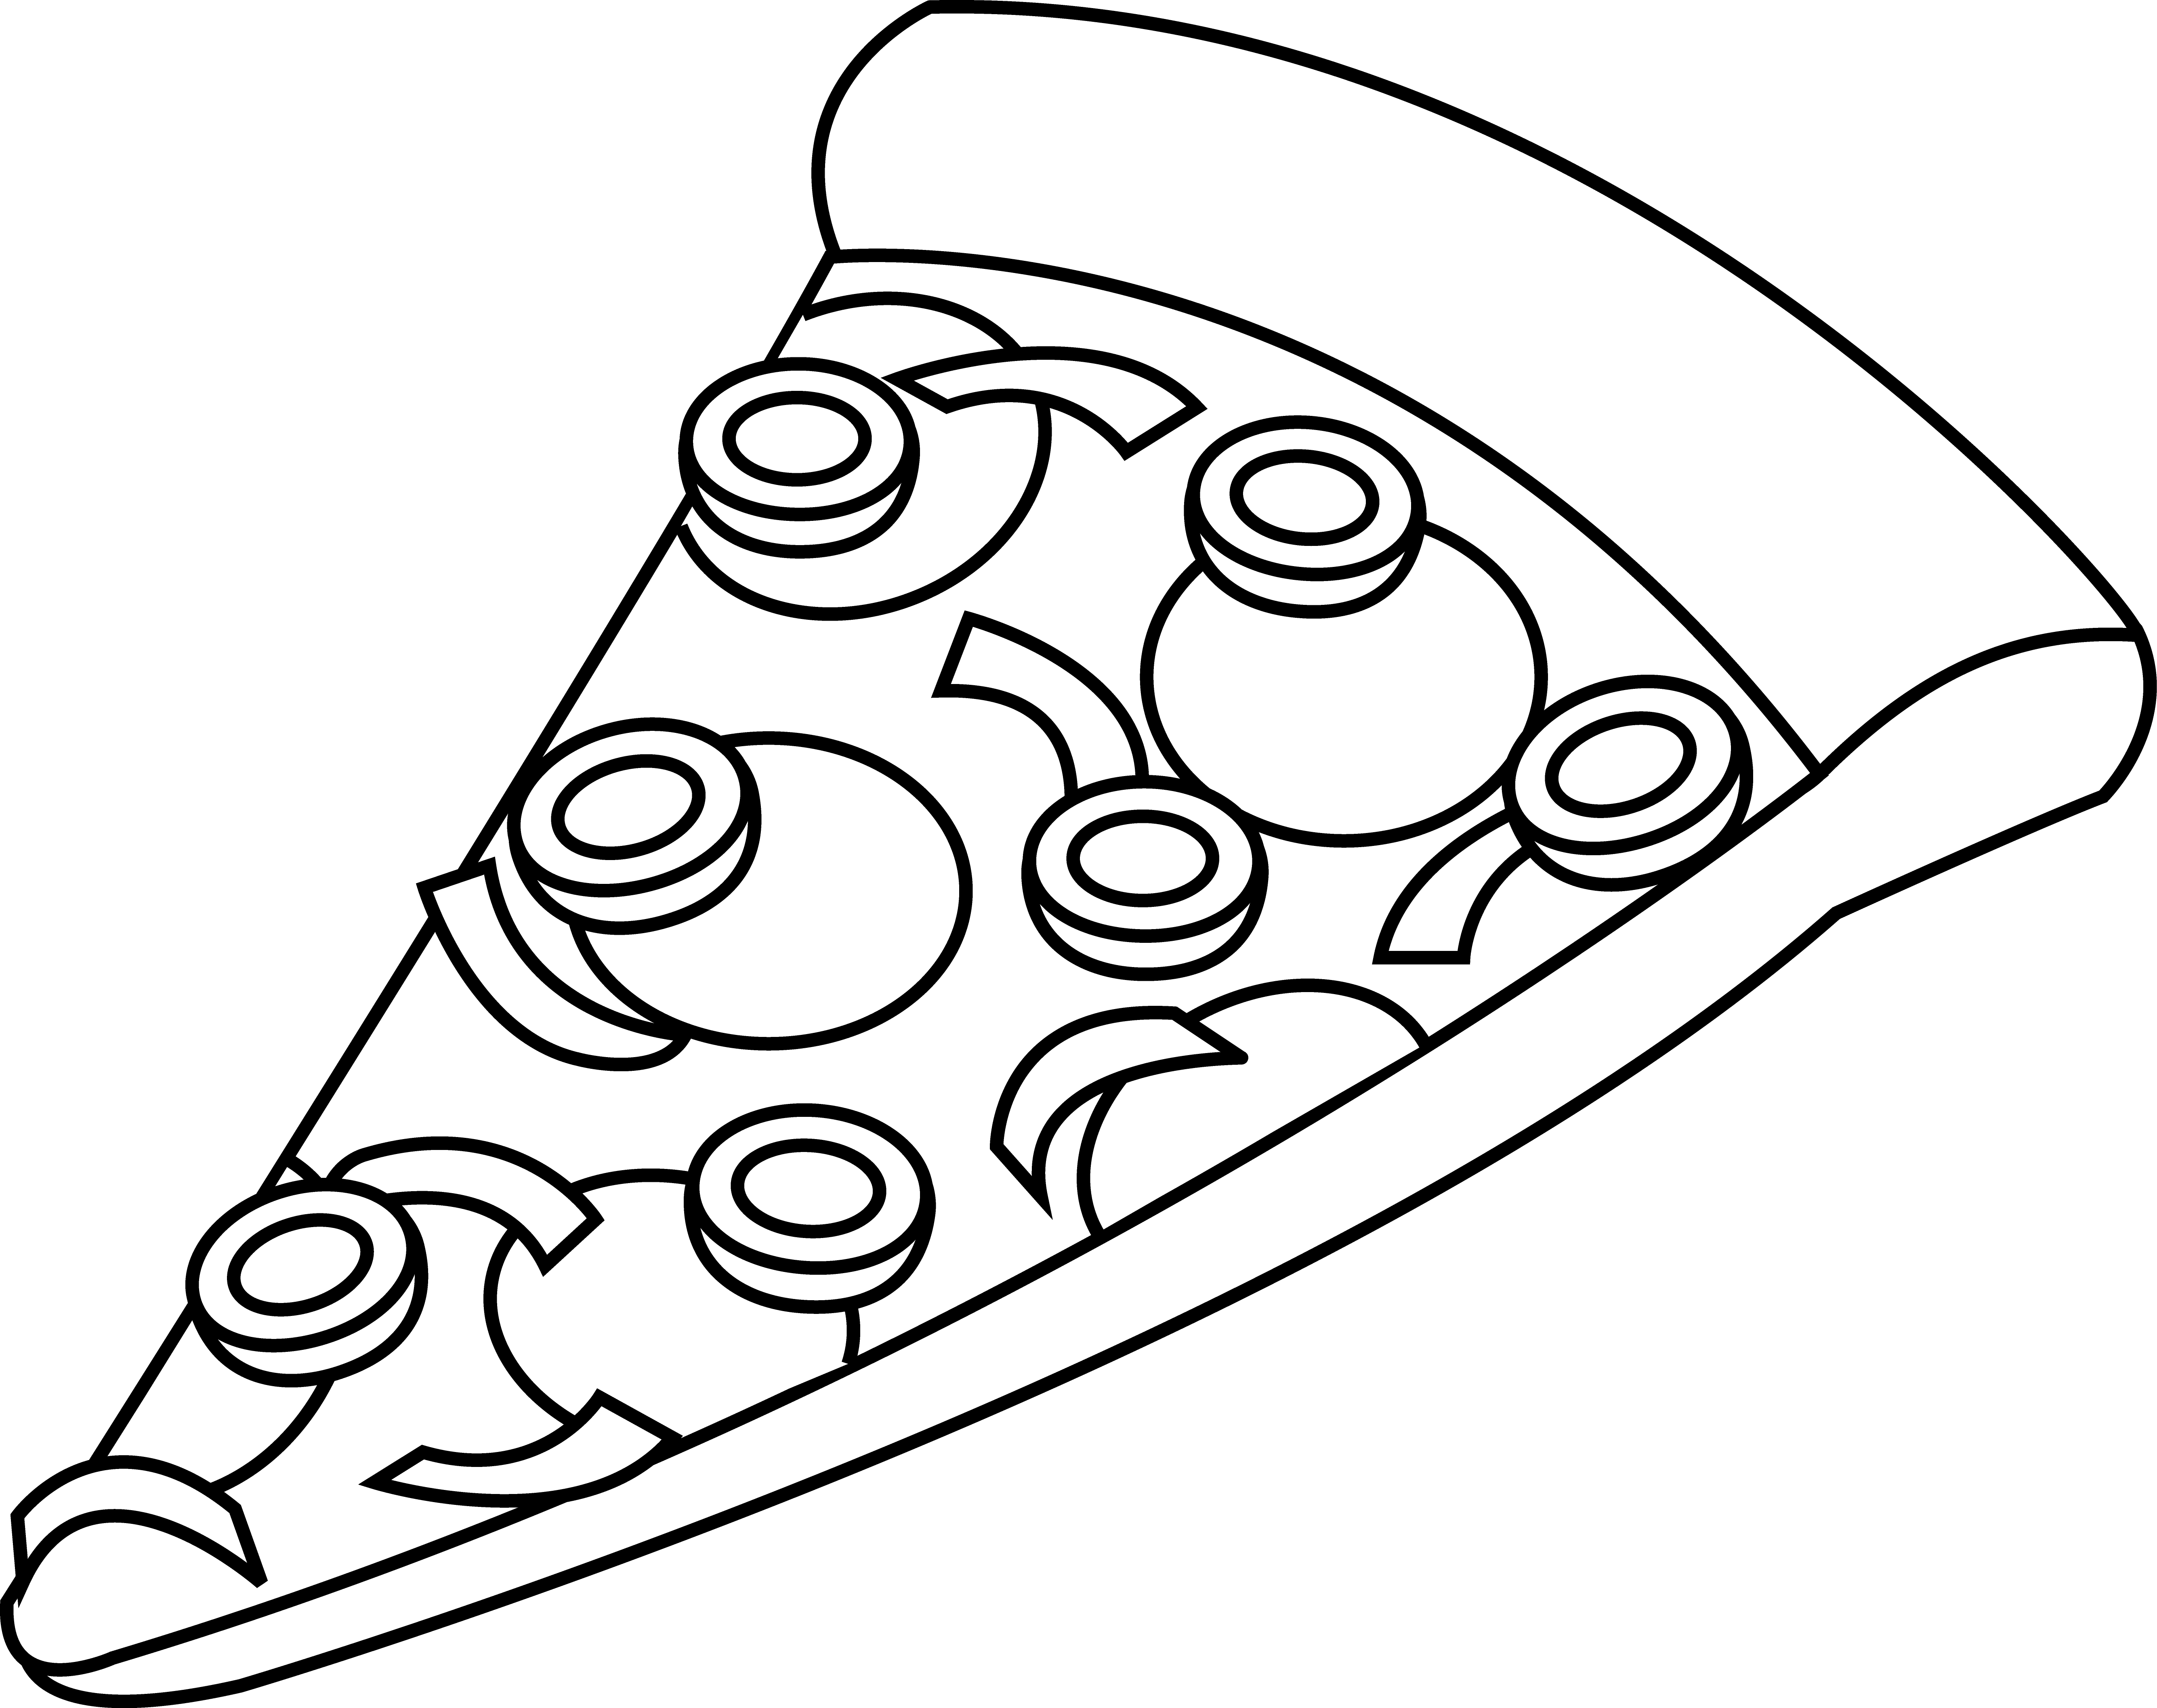 Images Of Pizza.